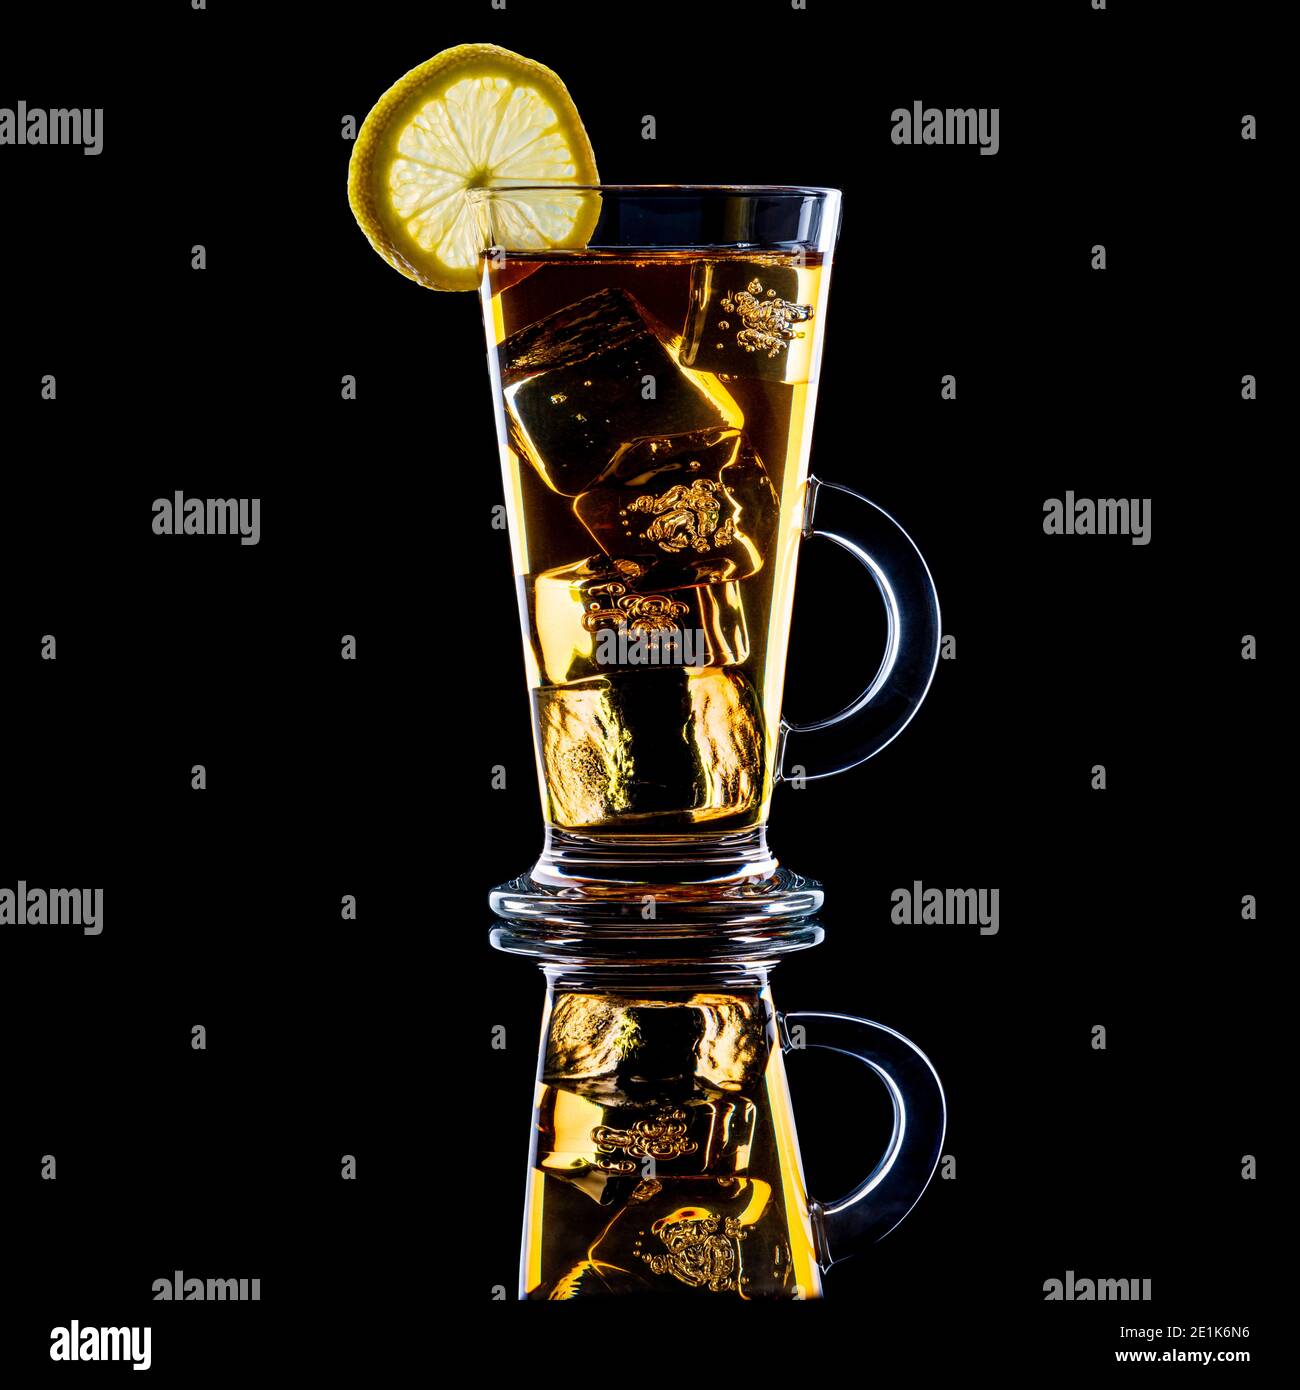 Iced tea with a slice of lemon in tall glass with handle on black background Stock Photo